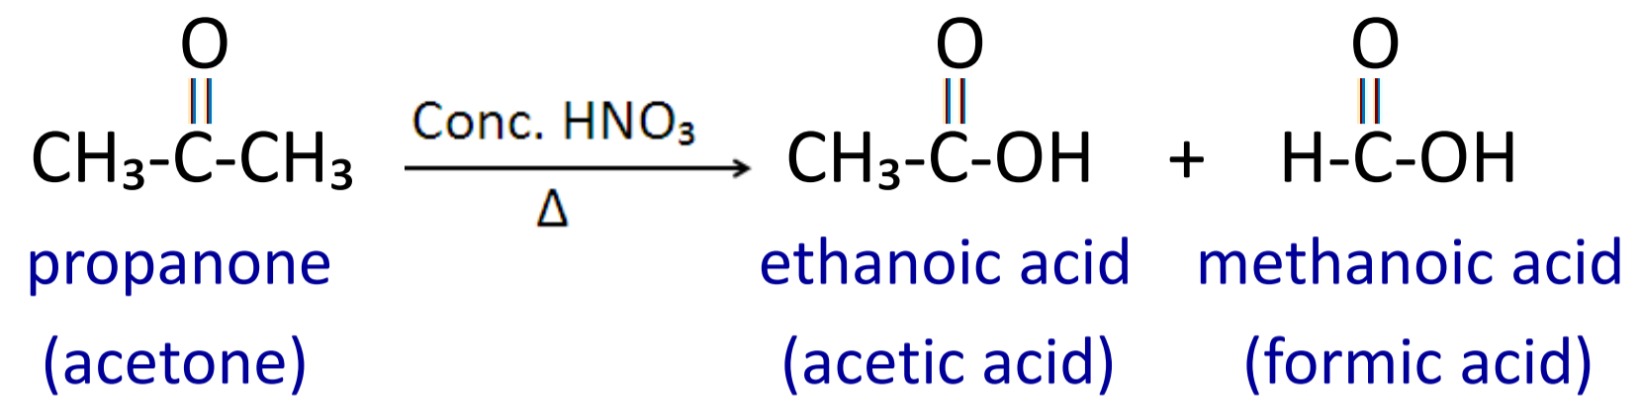 Ketone does not oxidized easily because it has carbon to carbon strong covalent bond. Therefore ketones are oxidized under drastic condition with Conc. Nitric acid at high temperature then carboxylic acid having less number of carbon atom are formed.